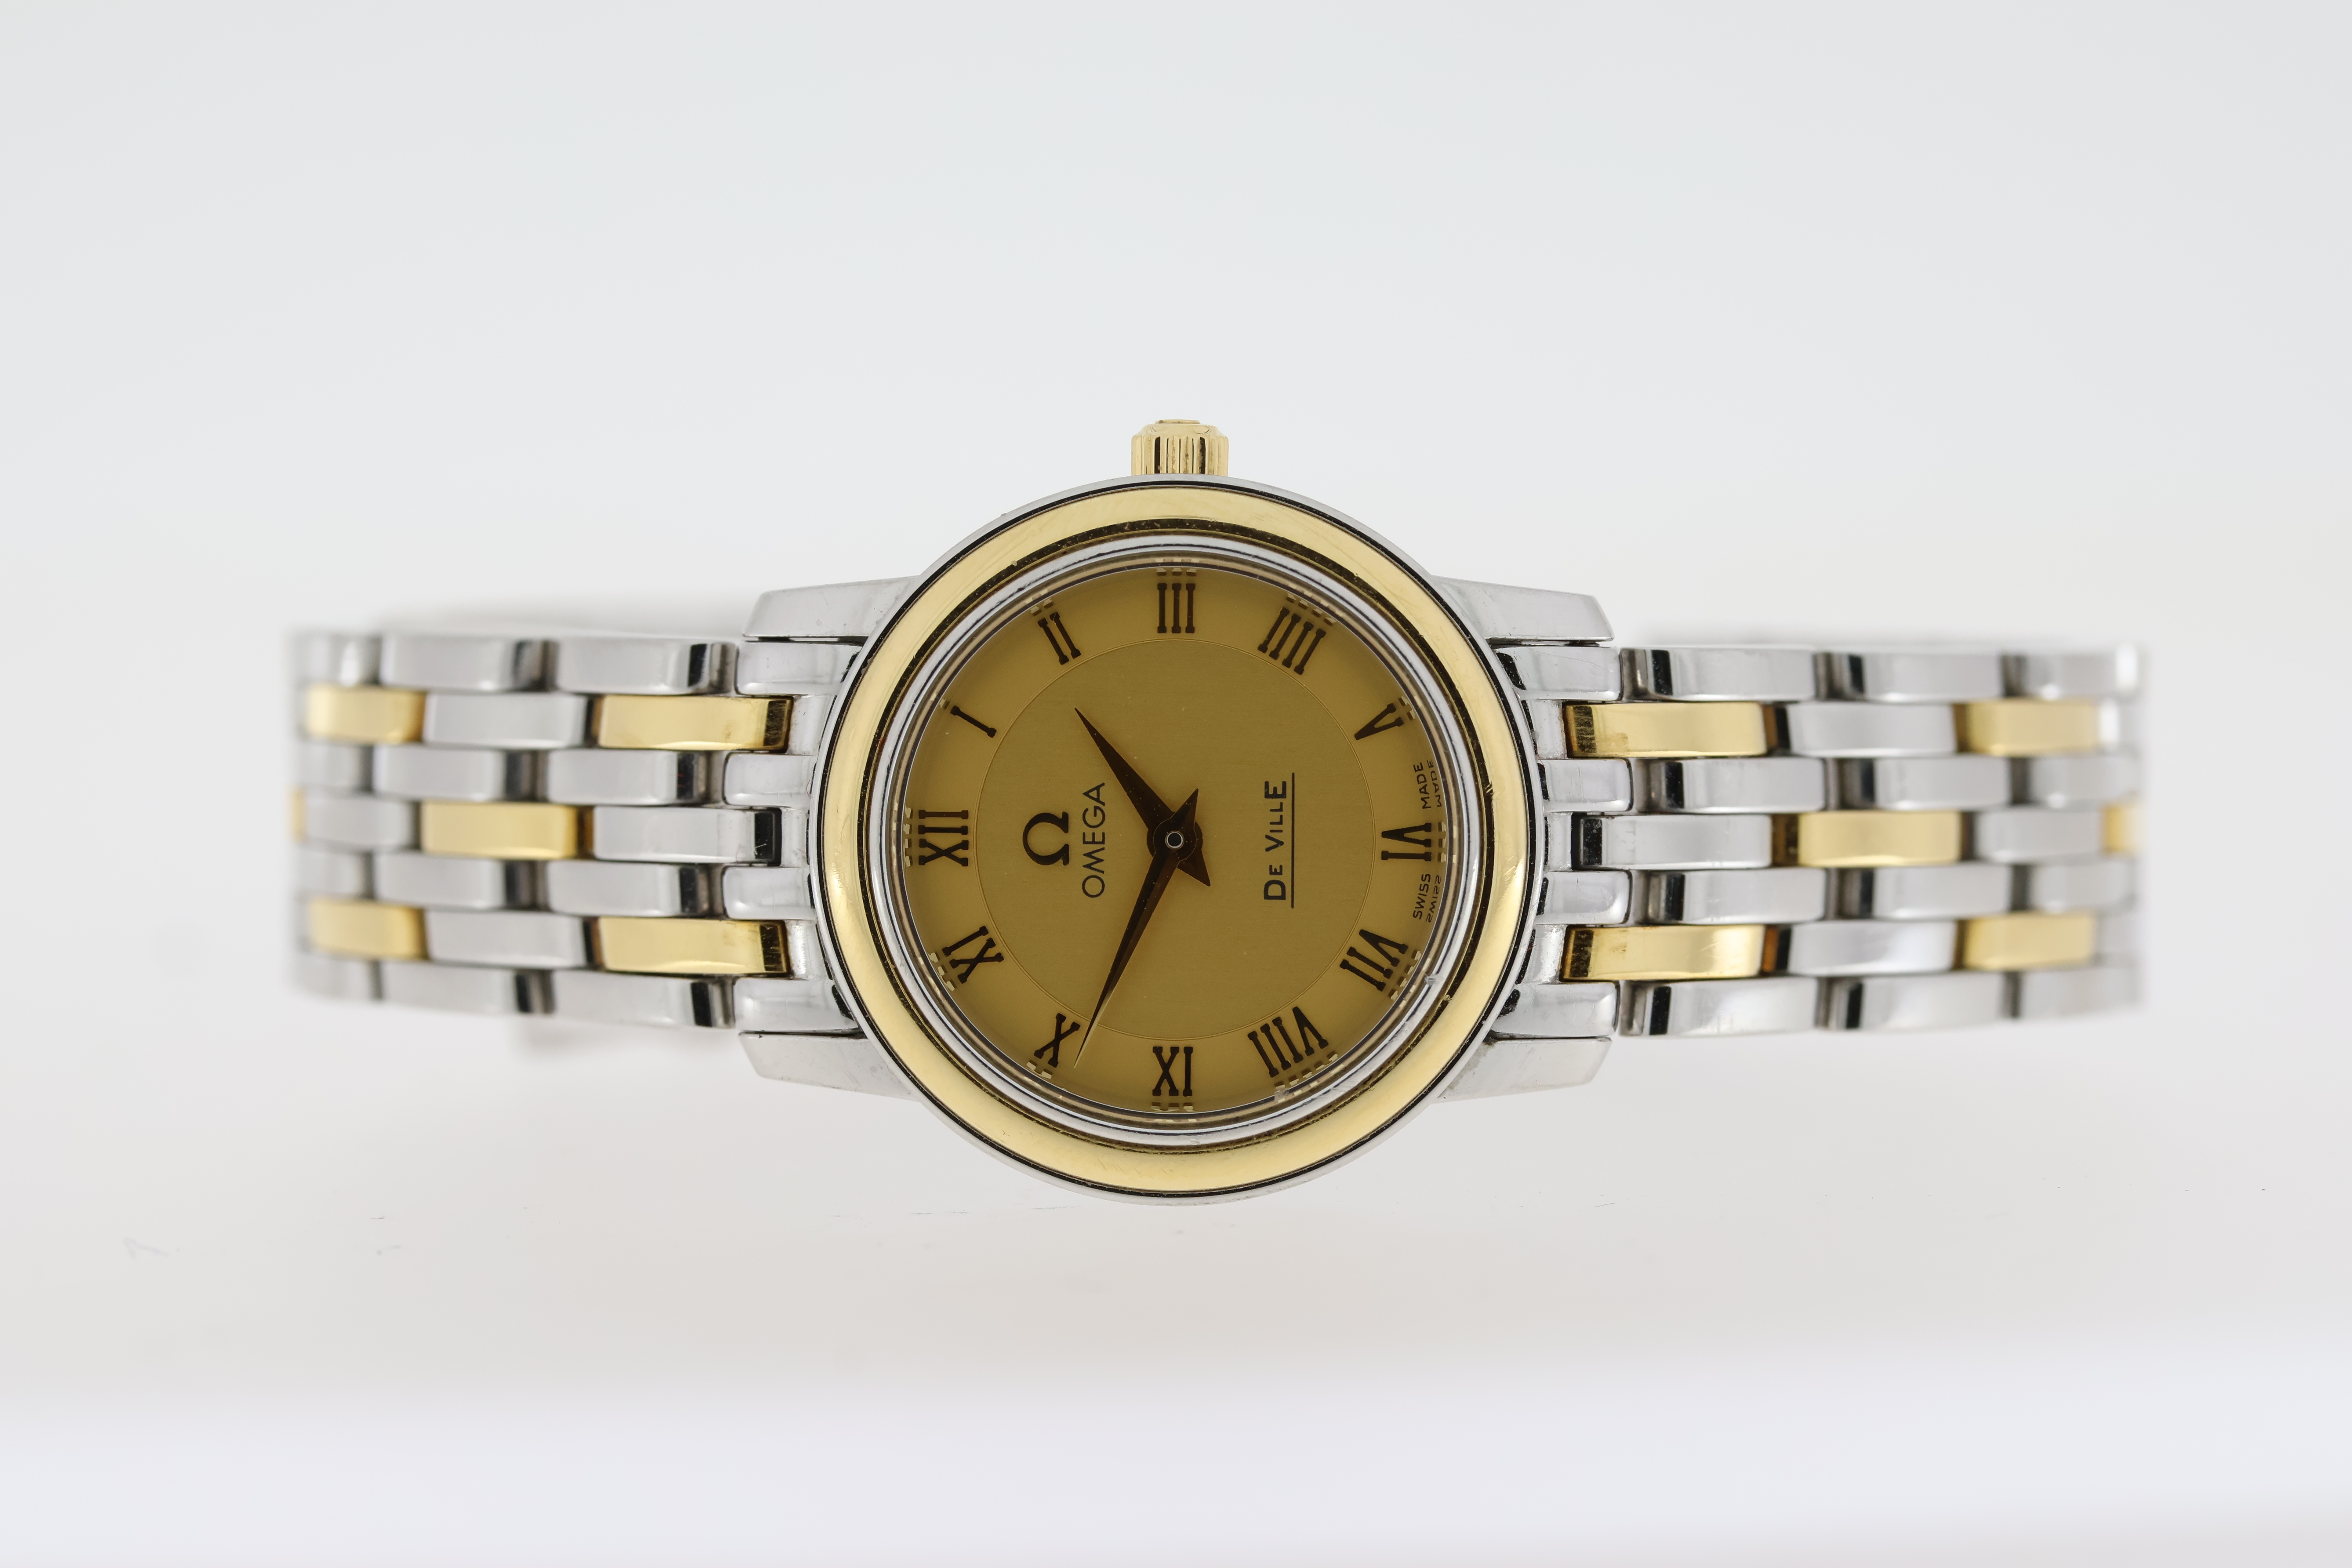 LADIES OMEGA DE VILLE PRESTIGE REFERENCE 43701200 CIRCA 2011 WITH BOX AND PAPERS - Image 5 of 9